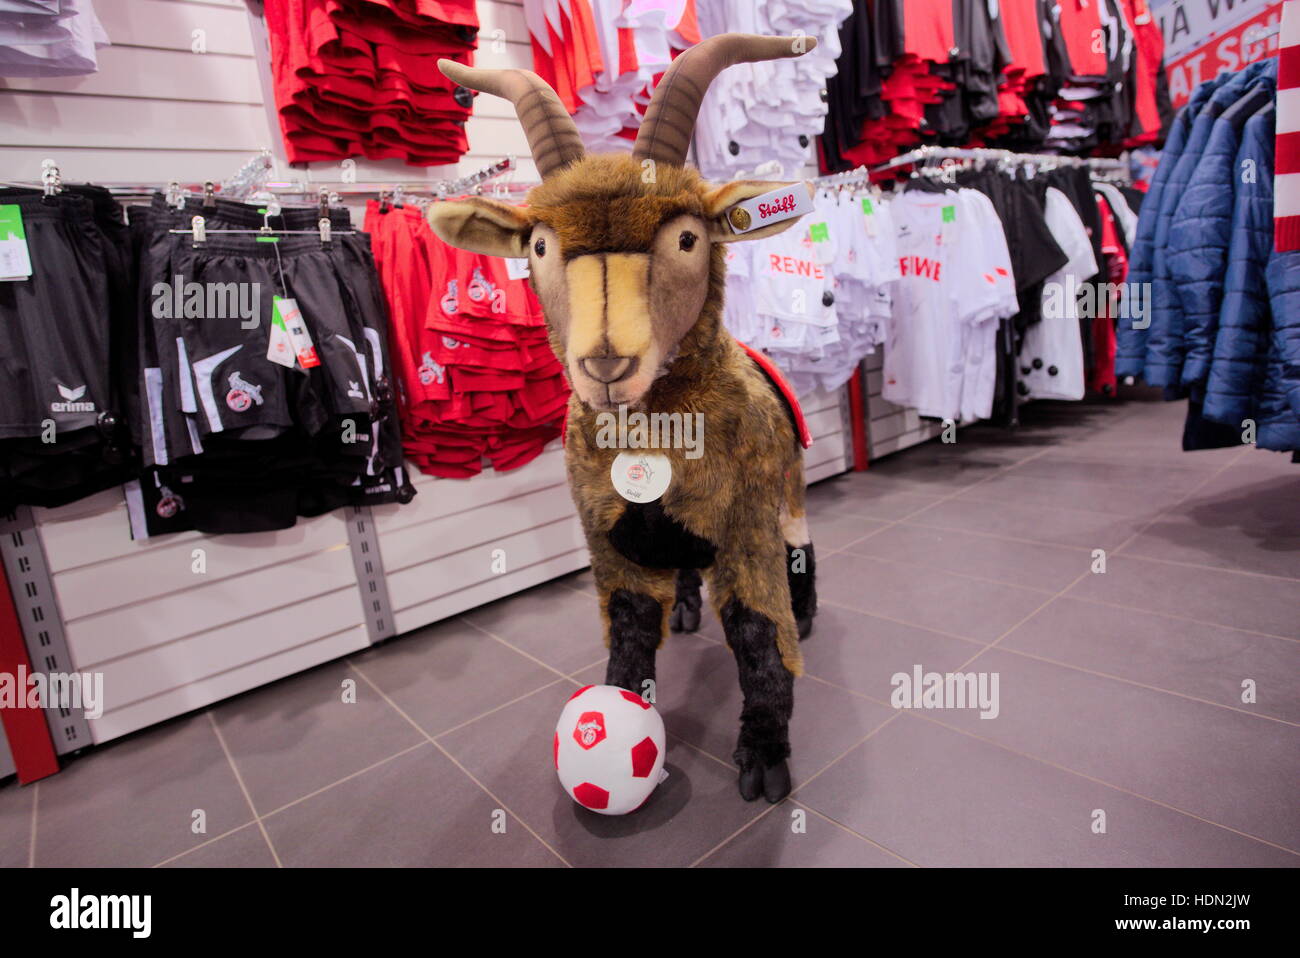 Cologne, Germany. 7th Dec, 2016. The club mascot of 1. FC Cologne, the billy goat Hennes VIII, can be bought as a life-sized plush toy for 1,948 Euro at the fan shop of the Bundesliga soccer club in Cologne, Germany, 7 December 2016. Photo: Henning Kaiser/dpa/Alamy Live News Stock Photo